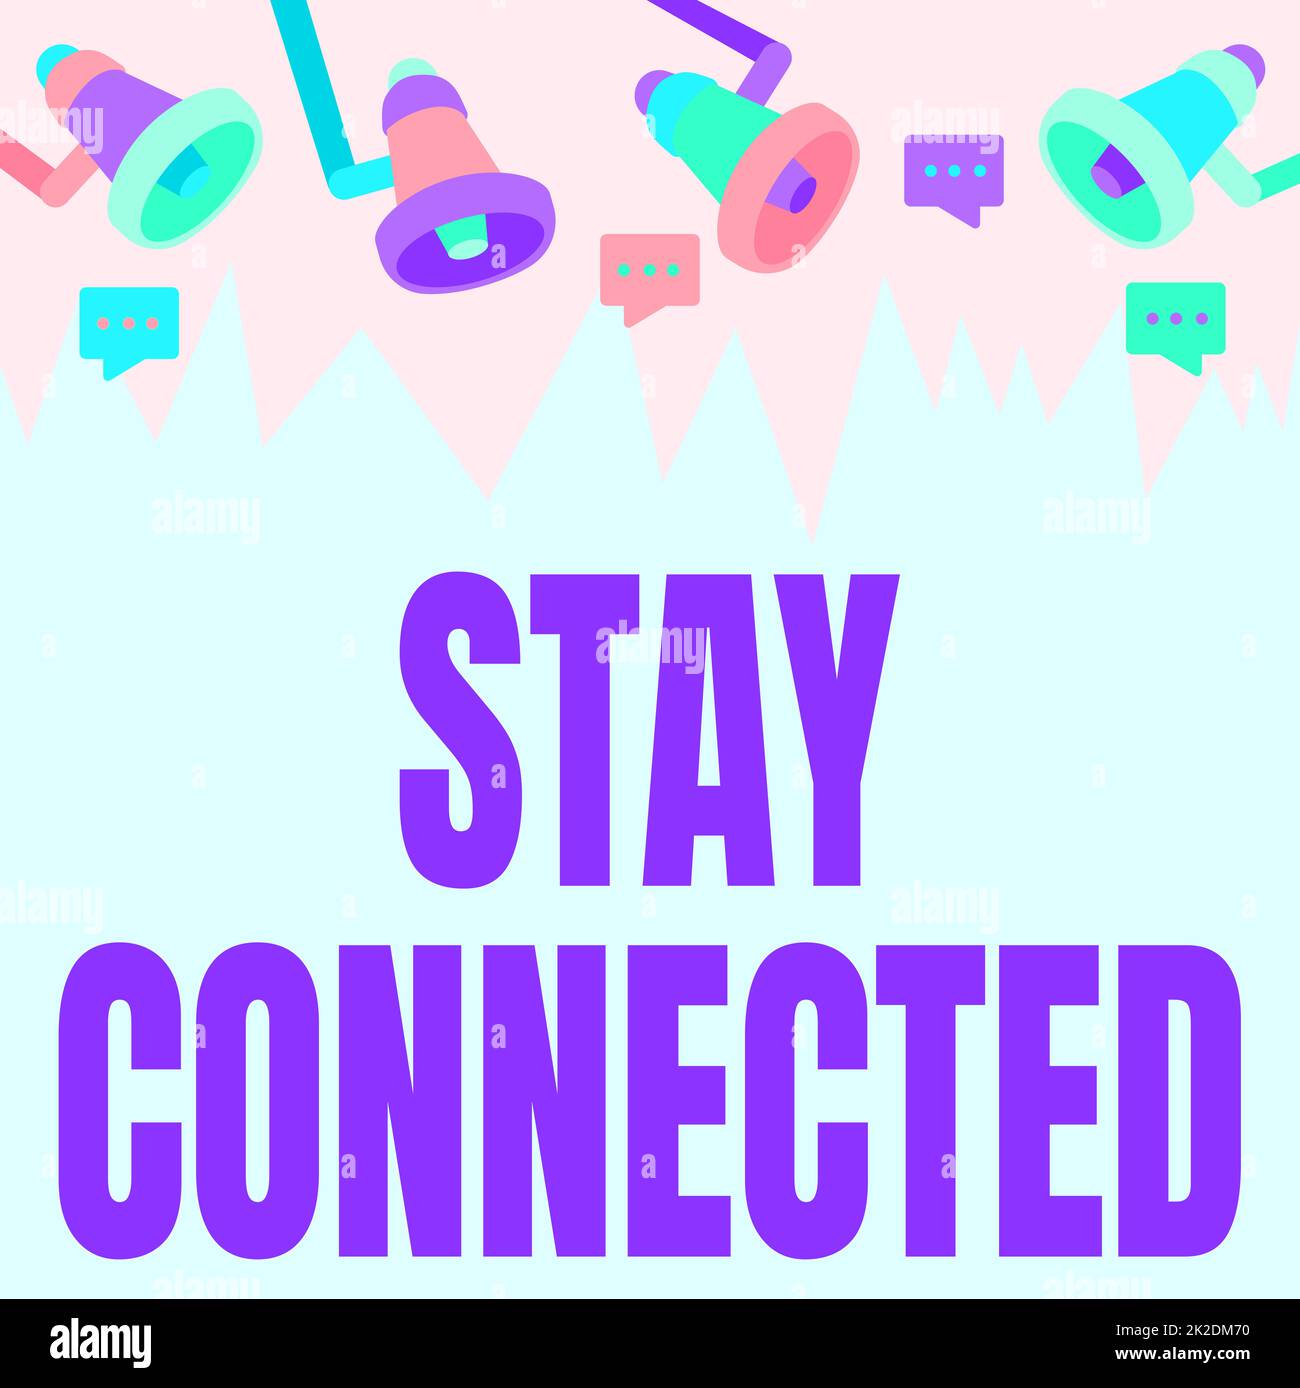 Stay connect